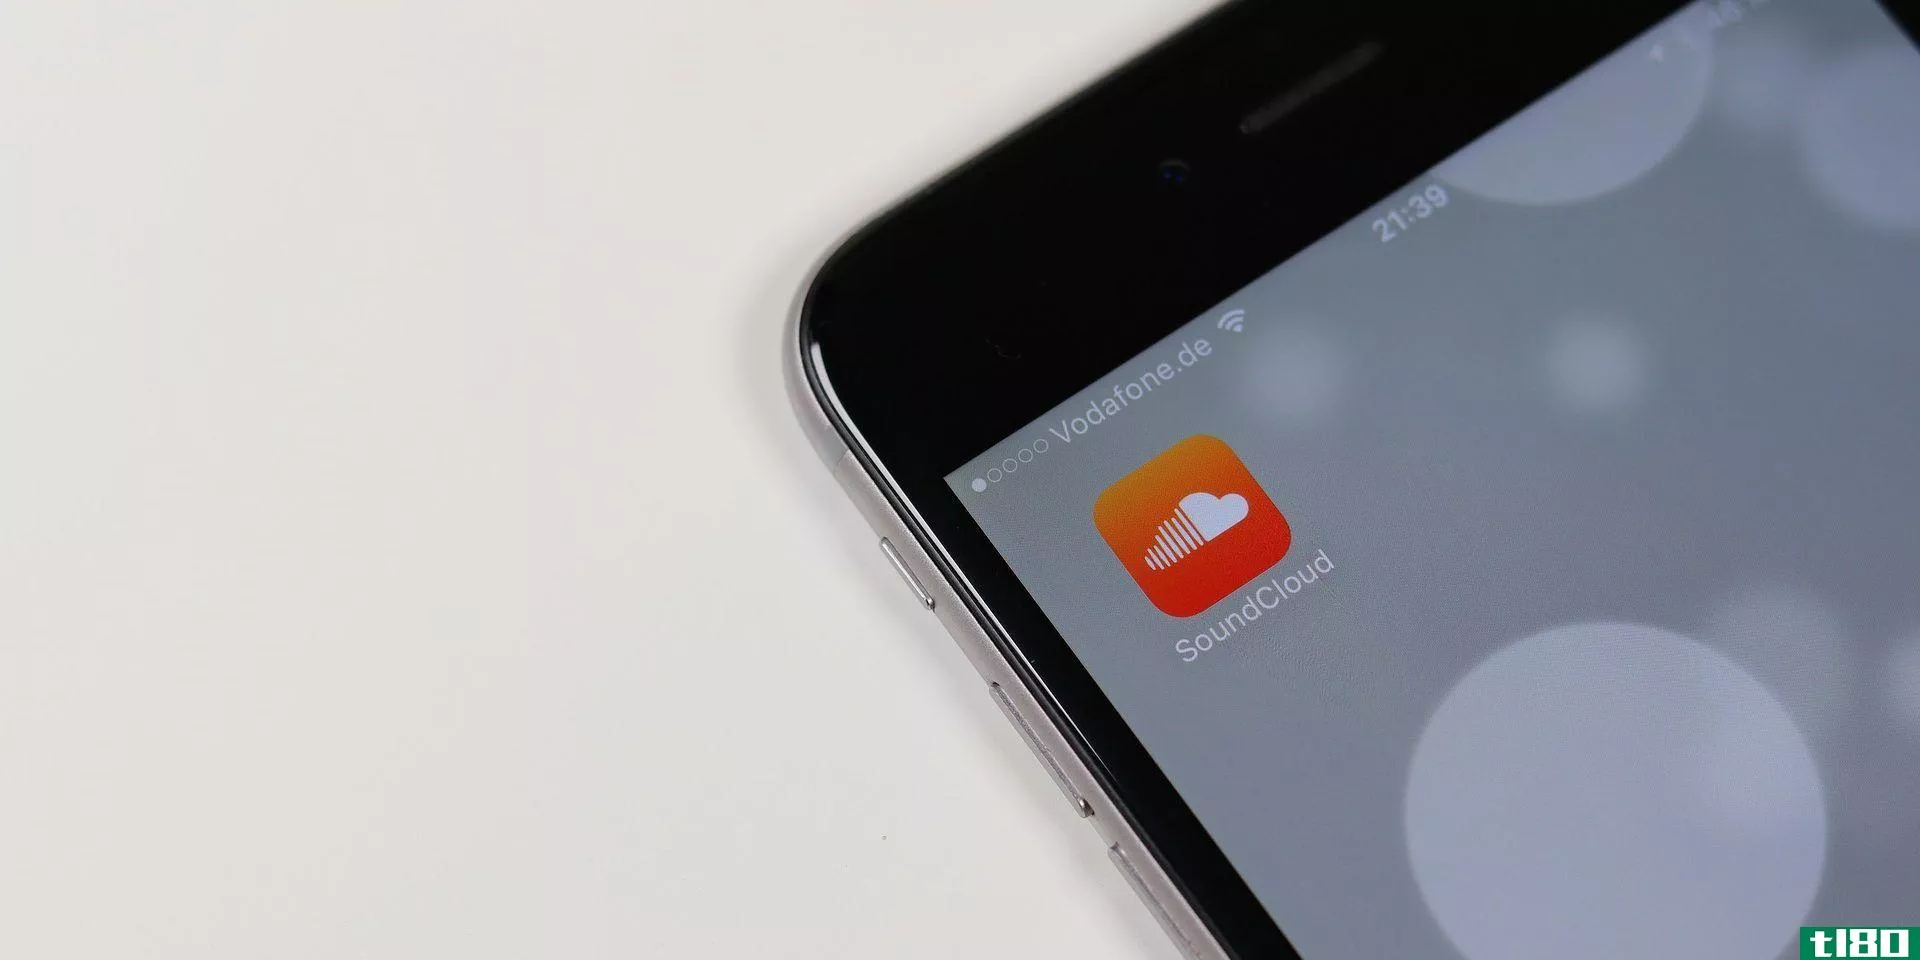 The Soundcloud app on the home screen of an iPhone